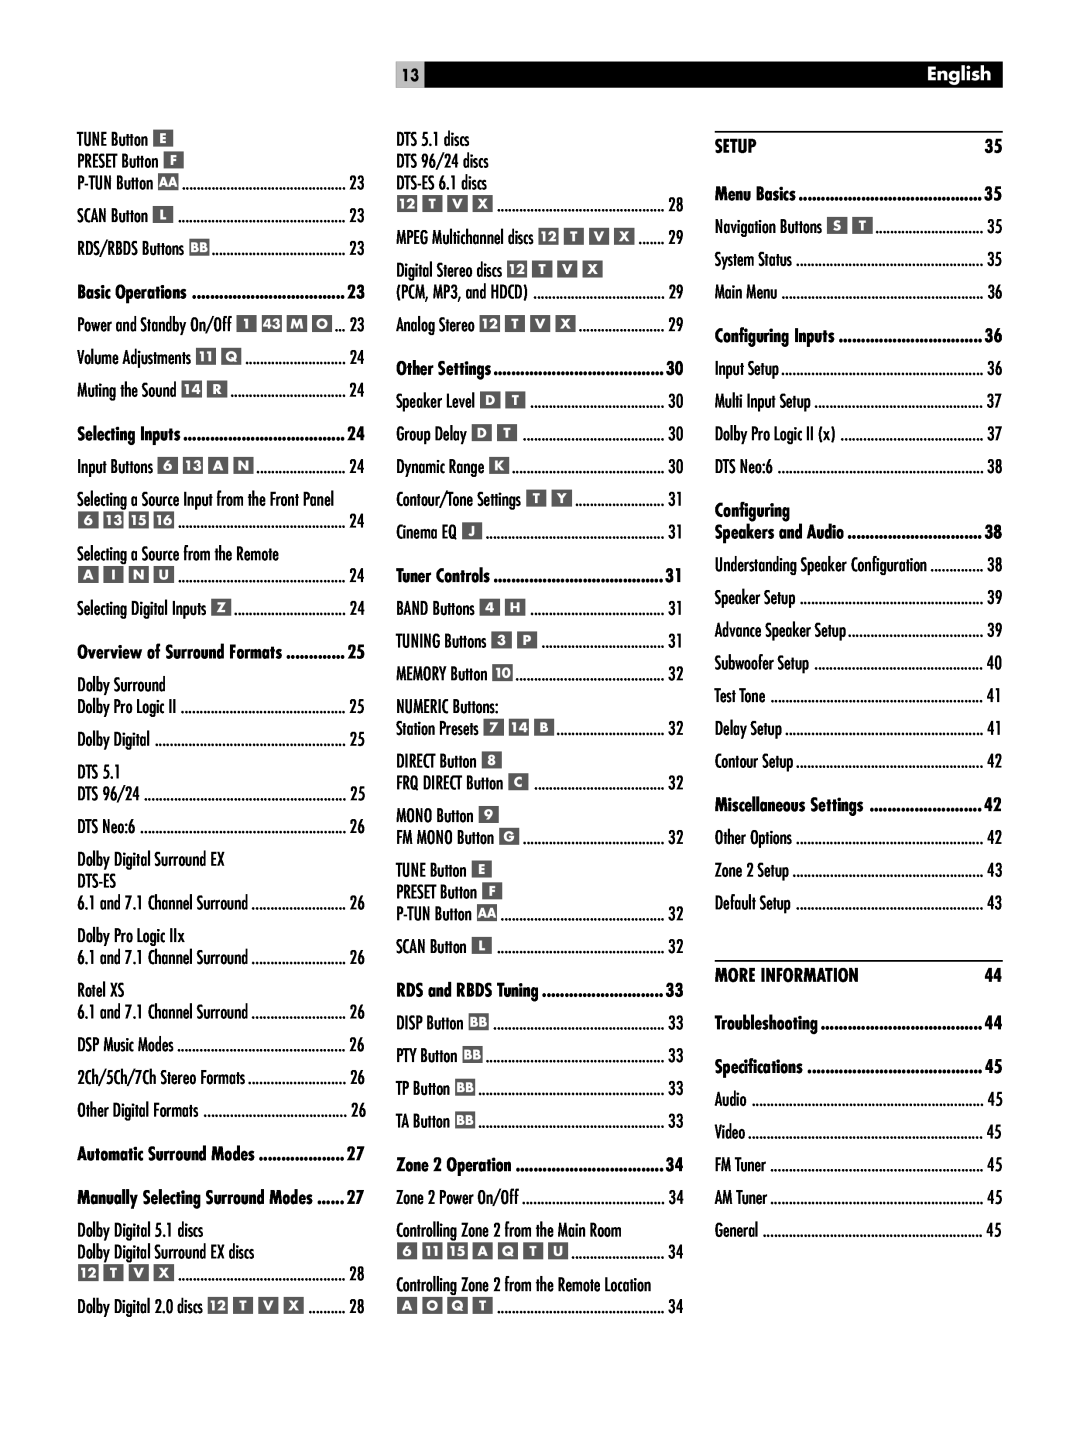 Rotel RSX-1056 owner manual Other Settings, English 